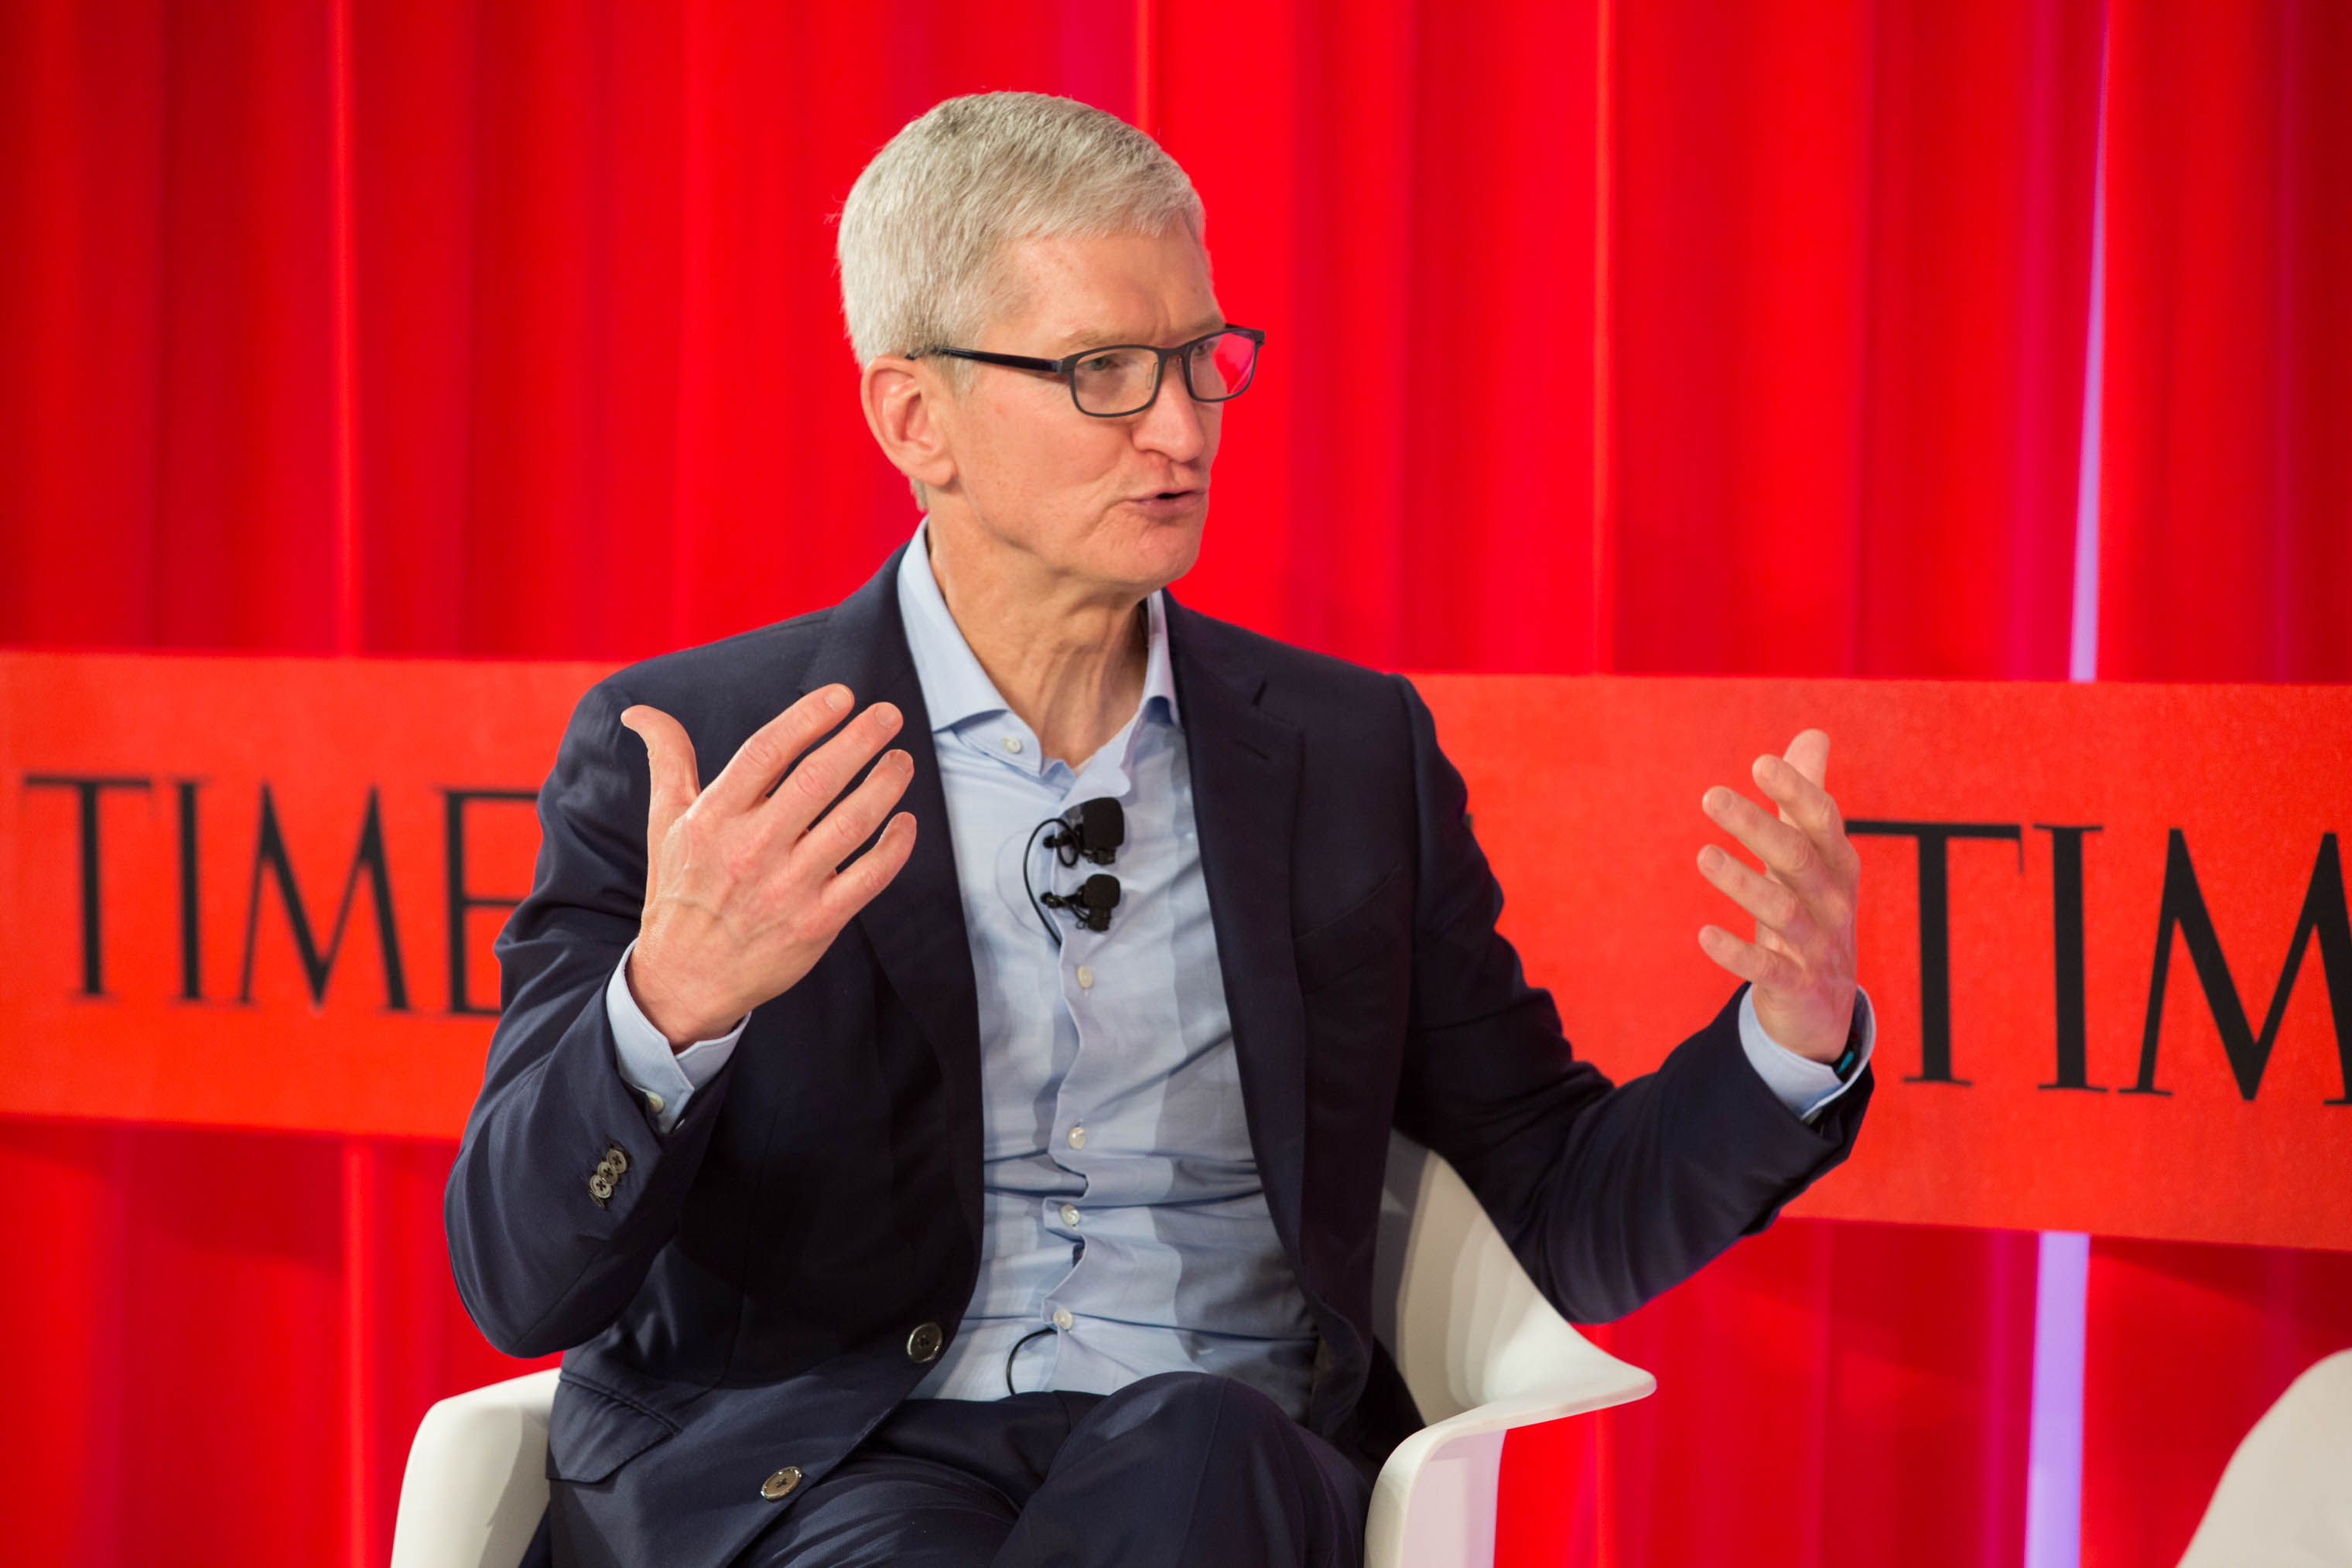 CEO of Apple Inc. Tim Cook speaks during a panel on Innovating with Purpose at the TIME100 Summit in New York, on April 23, 2019.